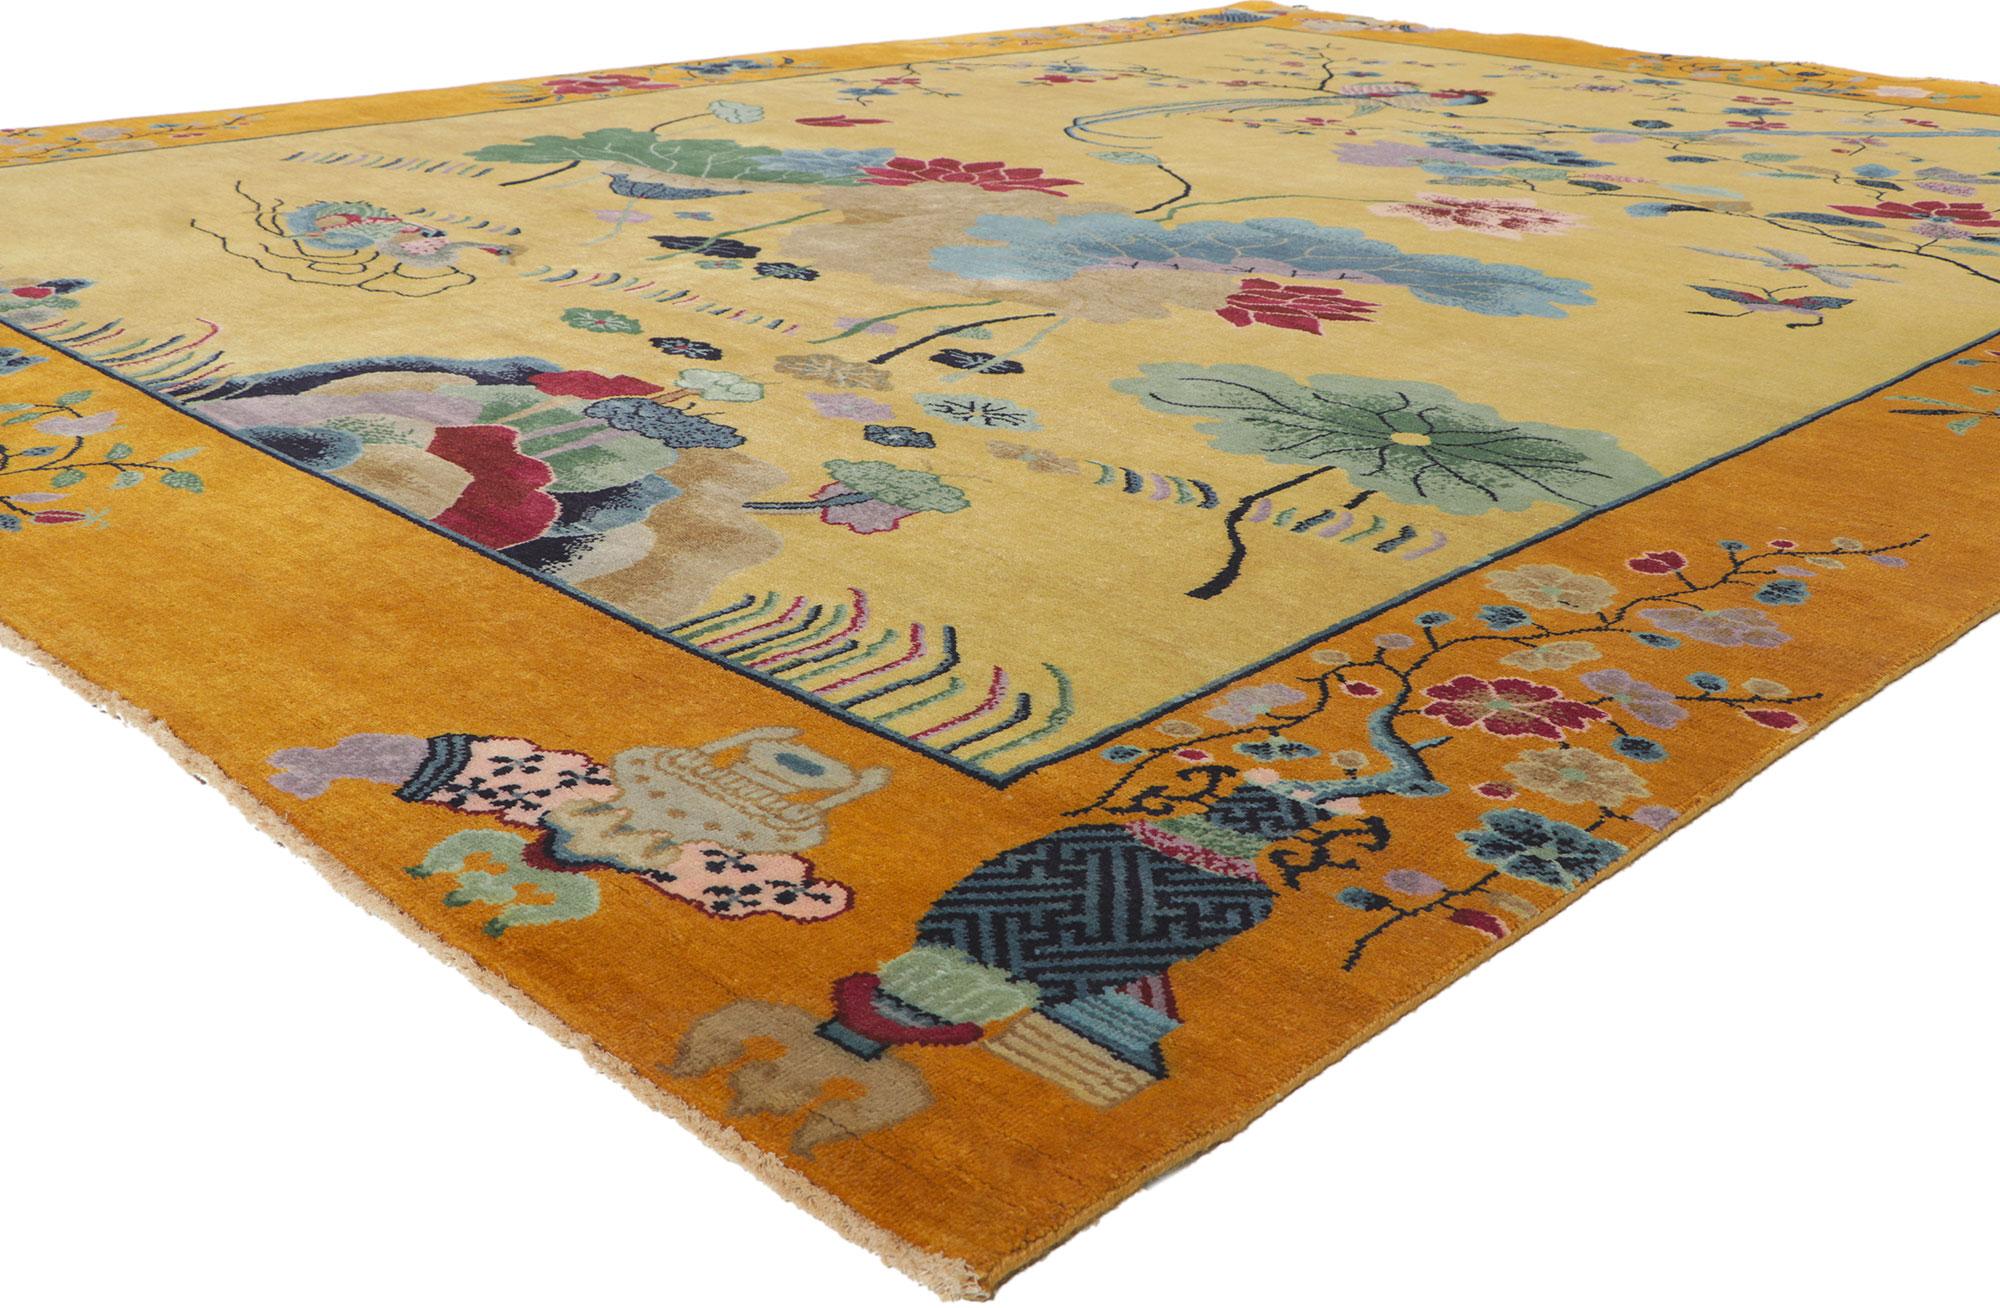 30920 New Chinese Art Deco Rug with Maximalist Style, 10'00 x 13'05.
Emanating maximalism with incredible detail and lavish texture, this Chinese Art Deco style rug is a captivating vision of woven beauty. The mythological imagery and vibrant